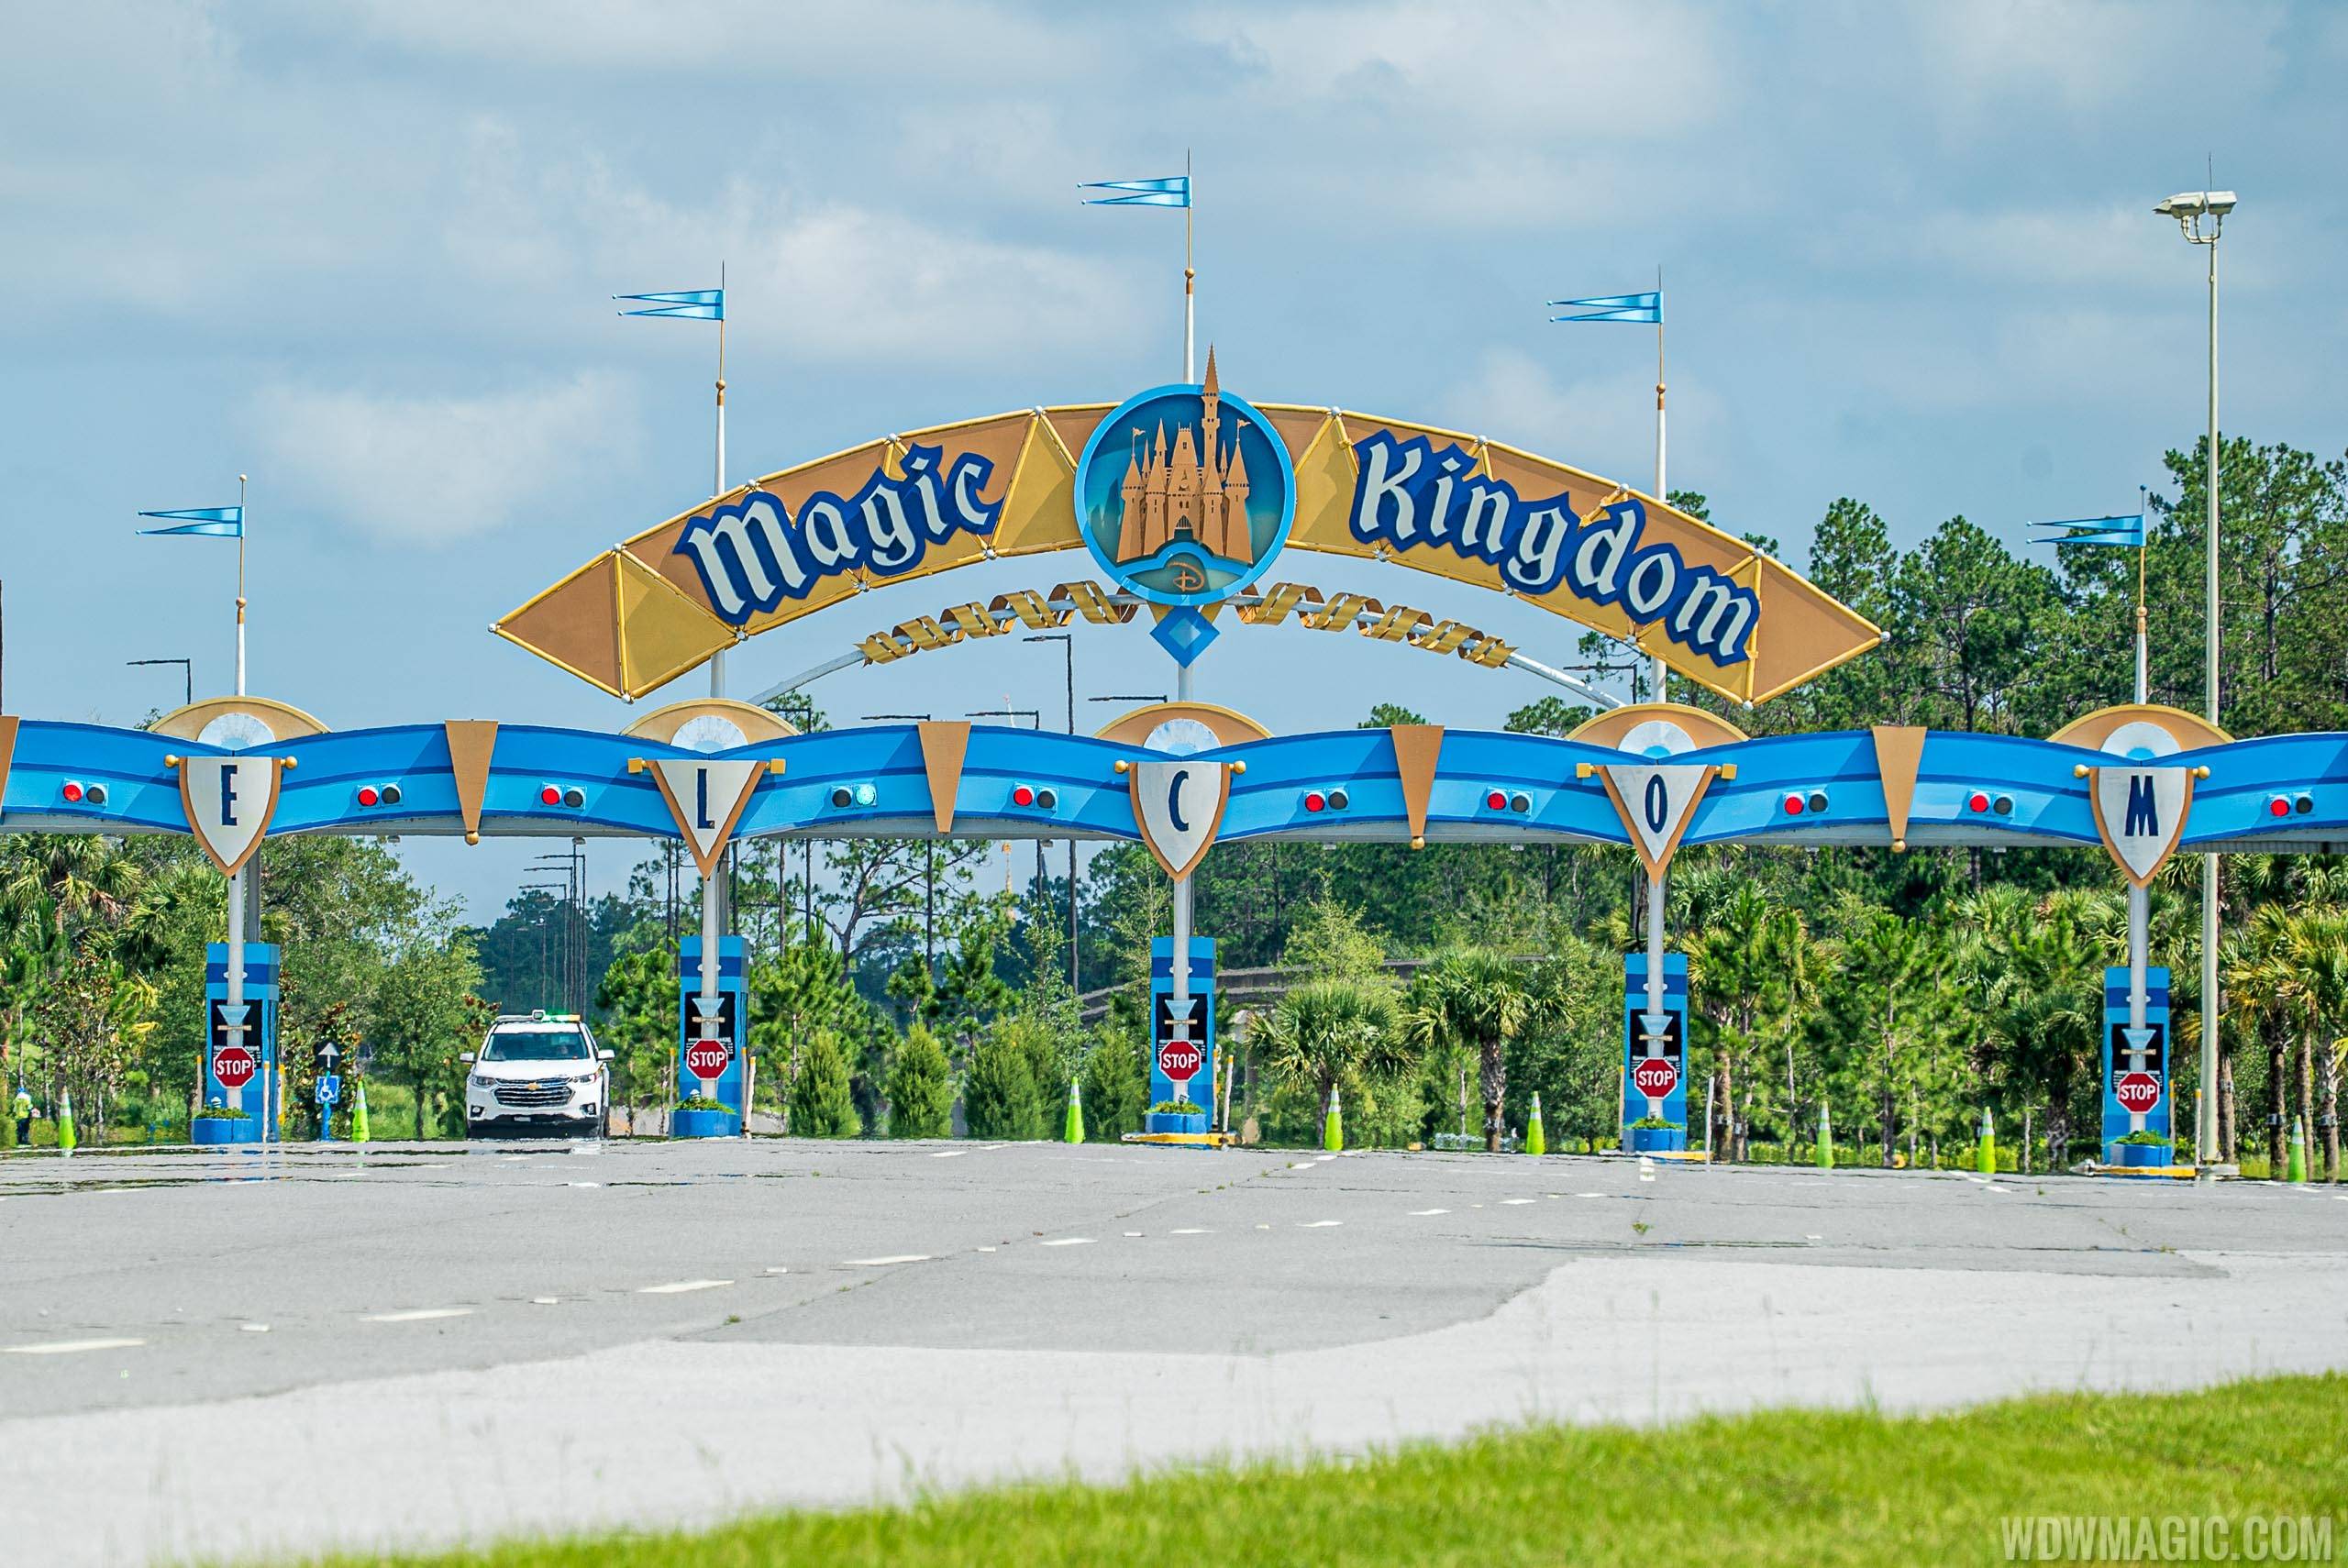 Magic Kingdom officially reopens July 11